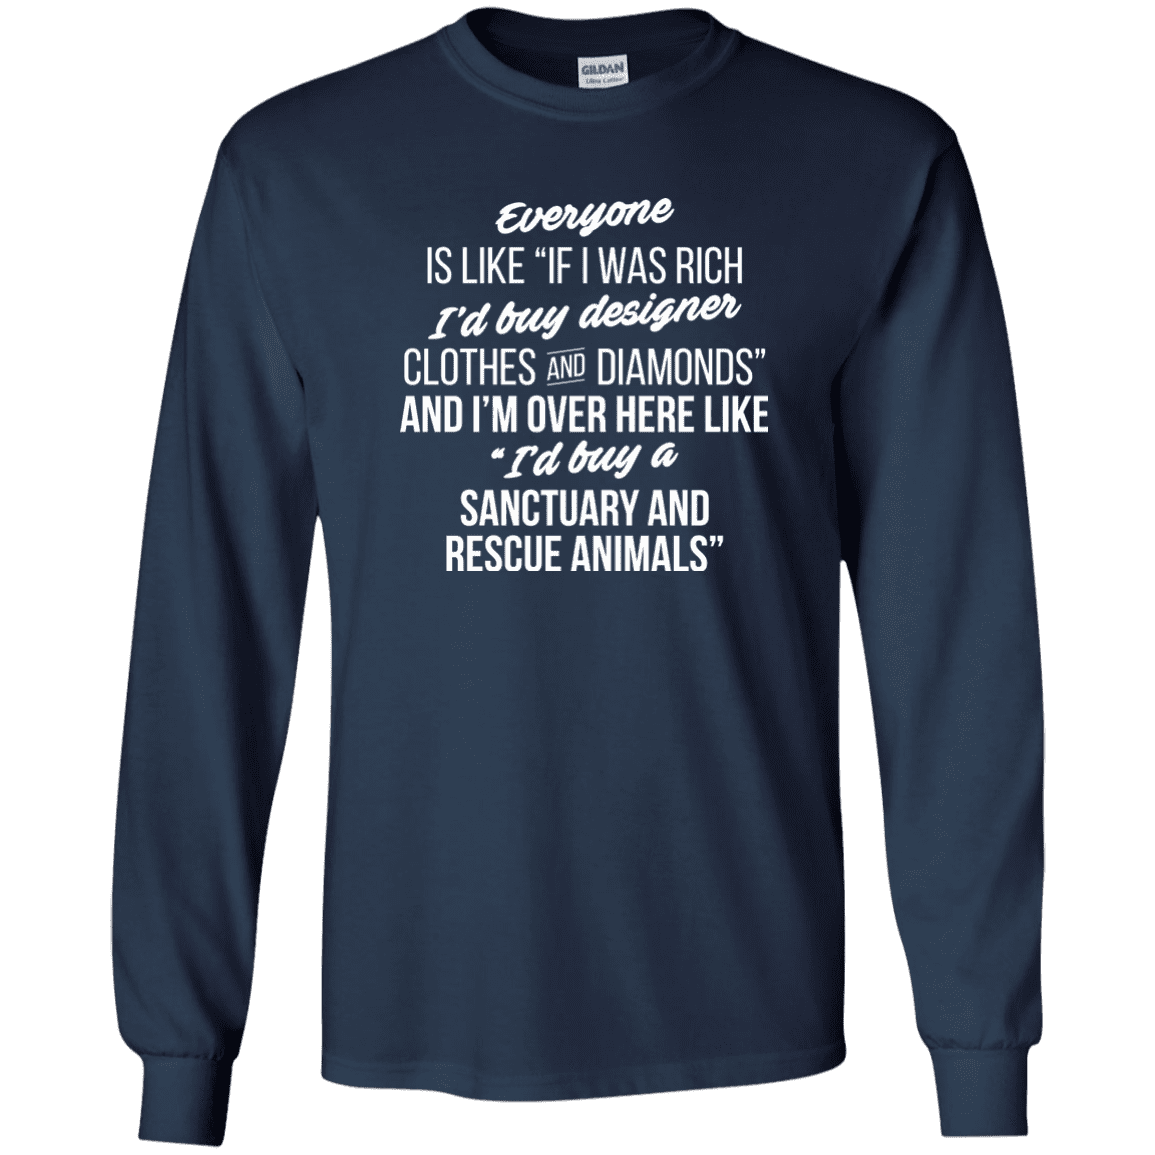 If I Was Rich - Long Sleeve T Shirt.